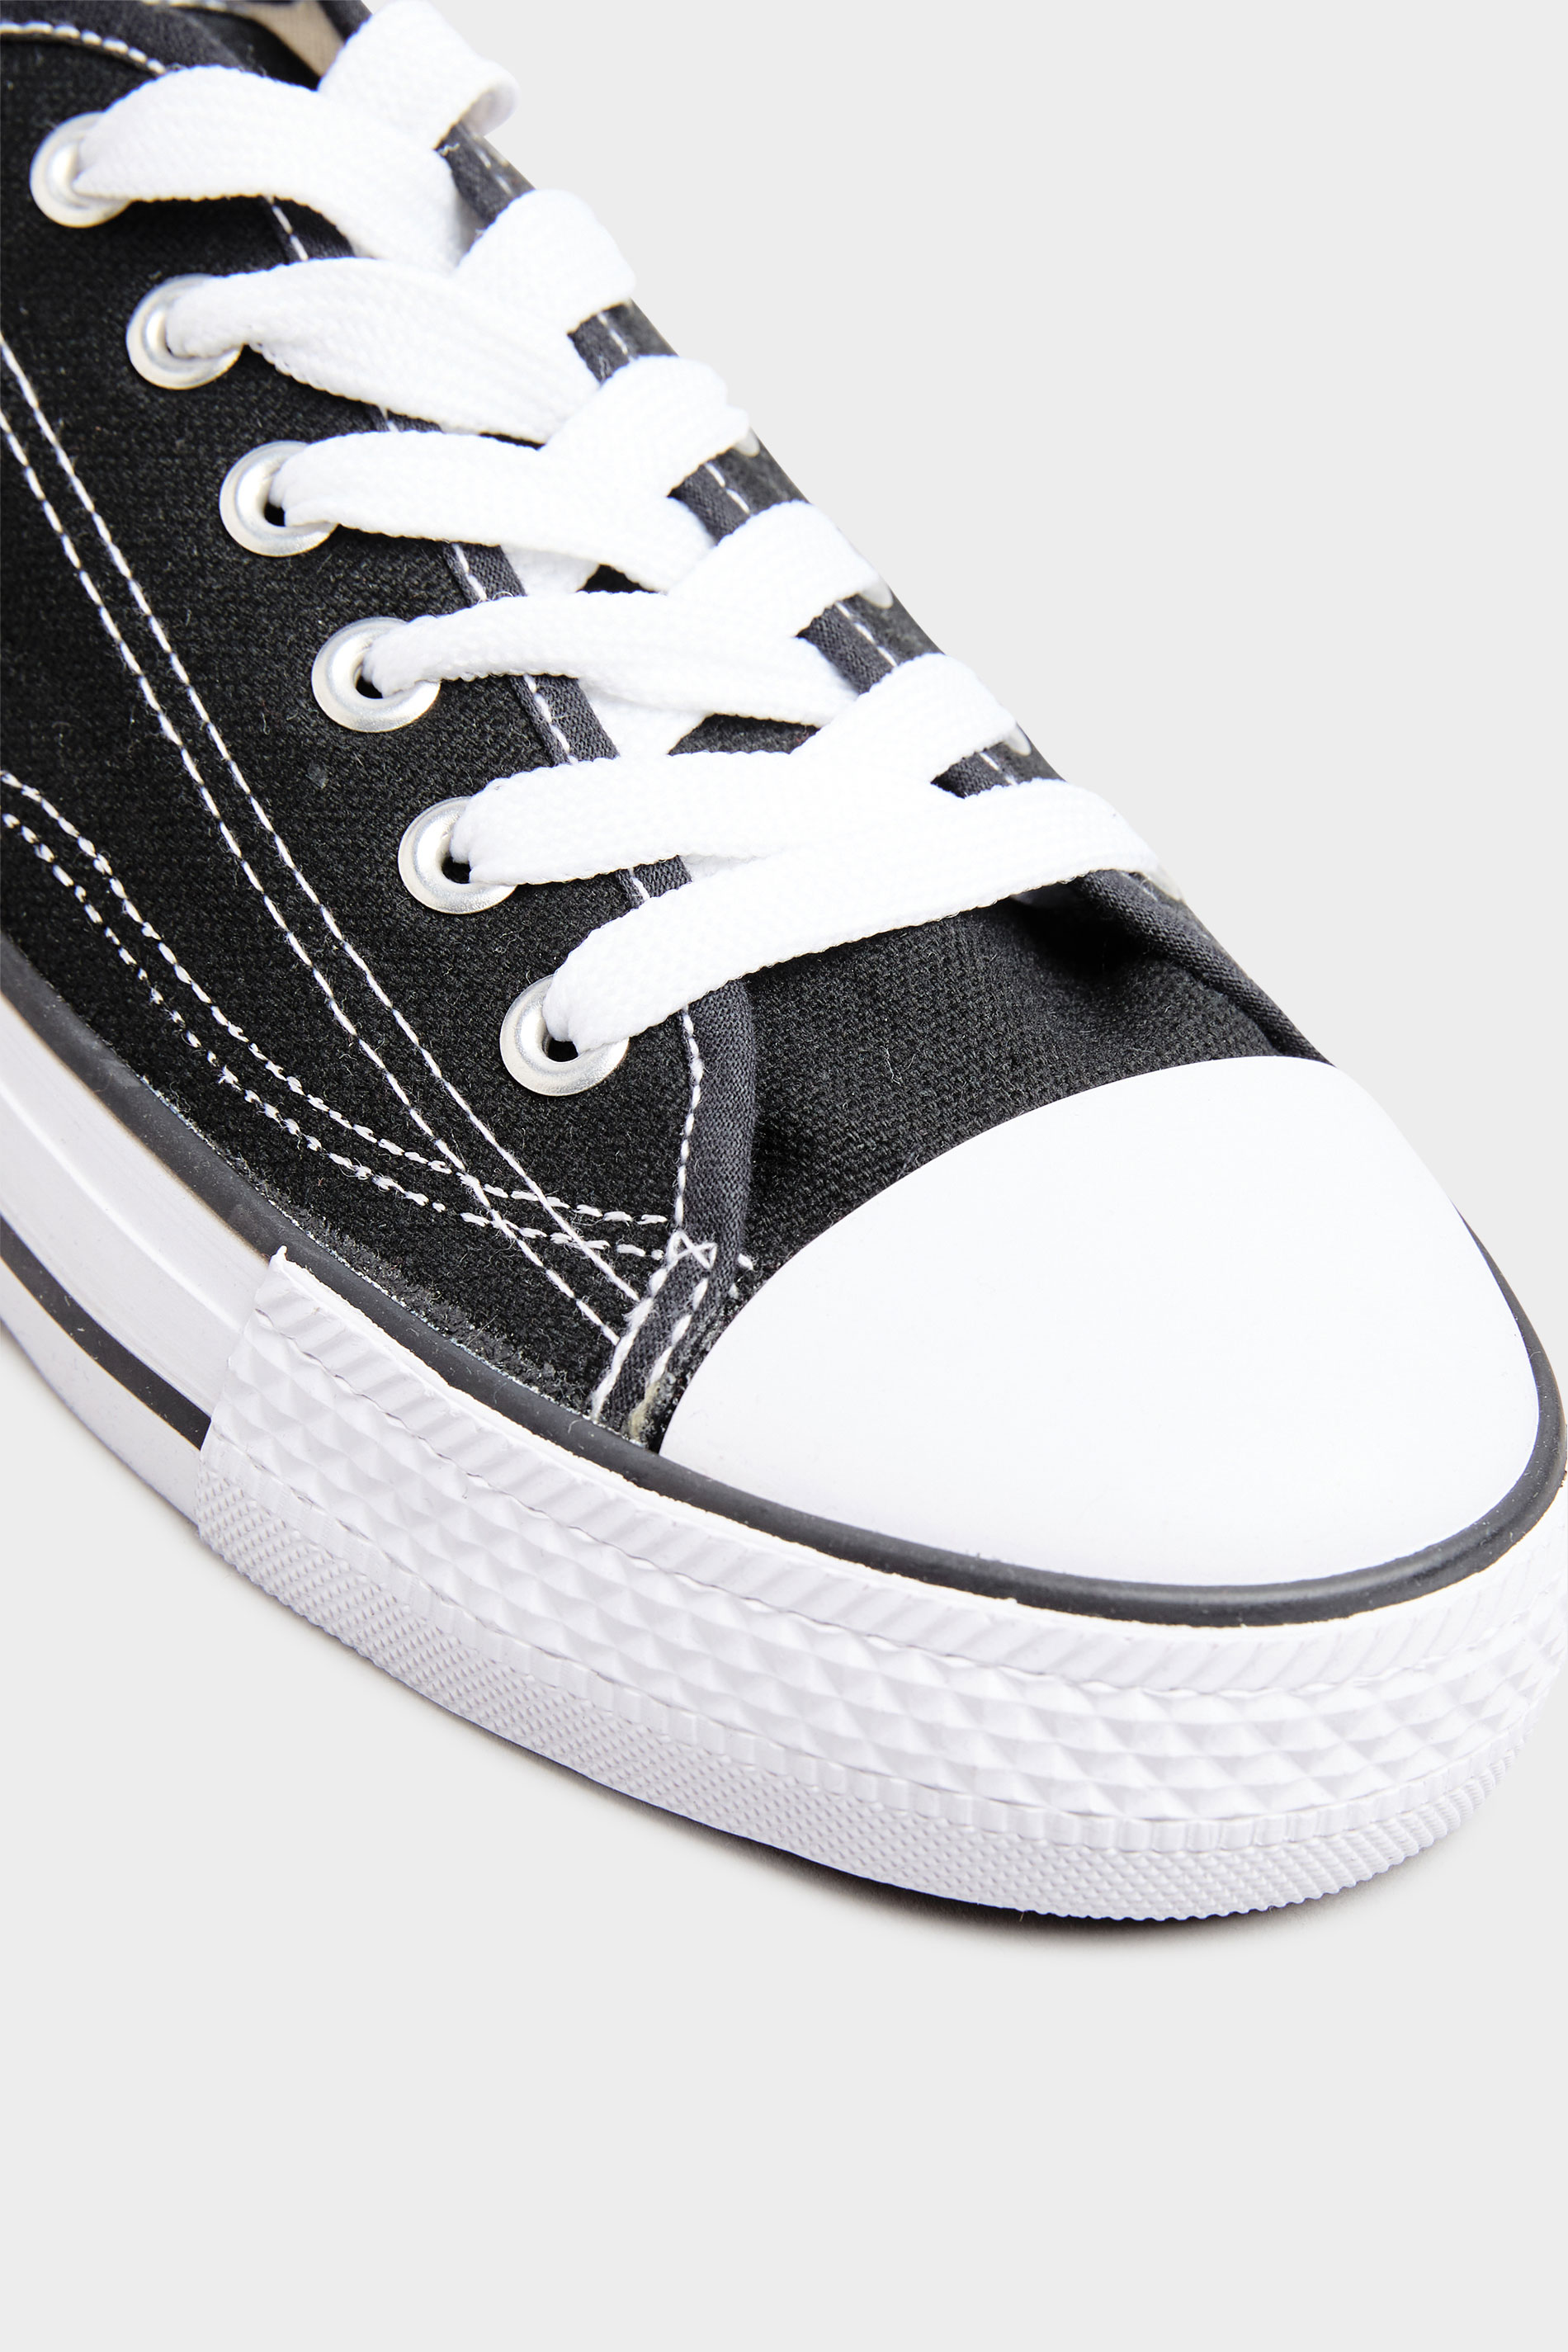 Black Low Canvas Trainer in Regular Fit | Long Tall Sally